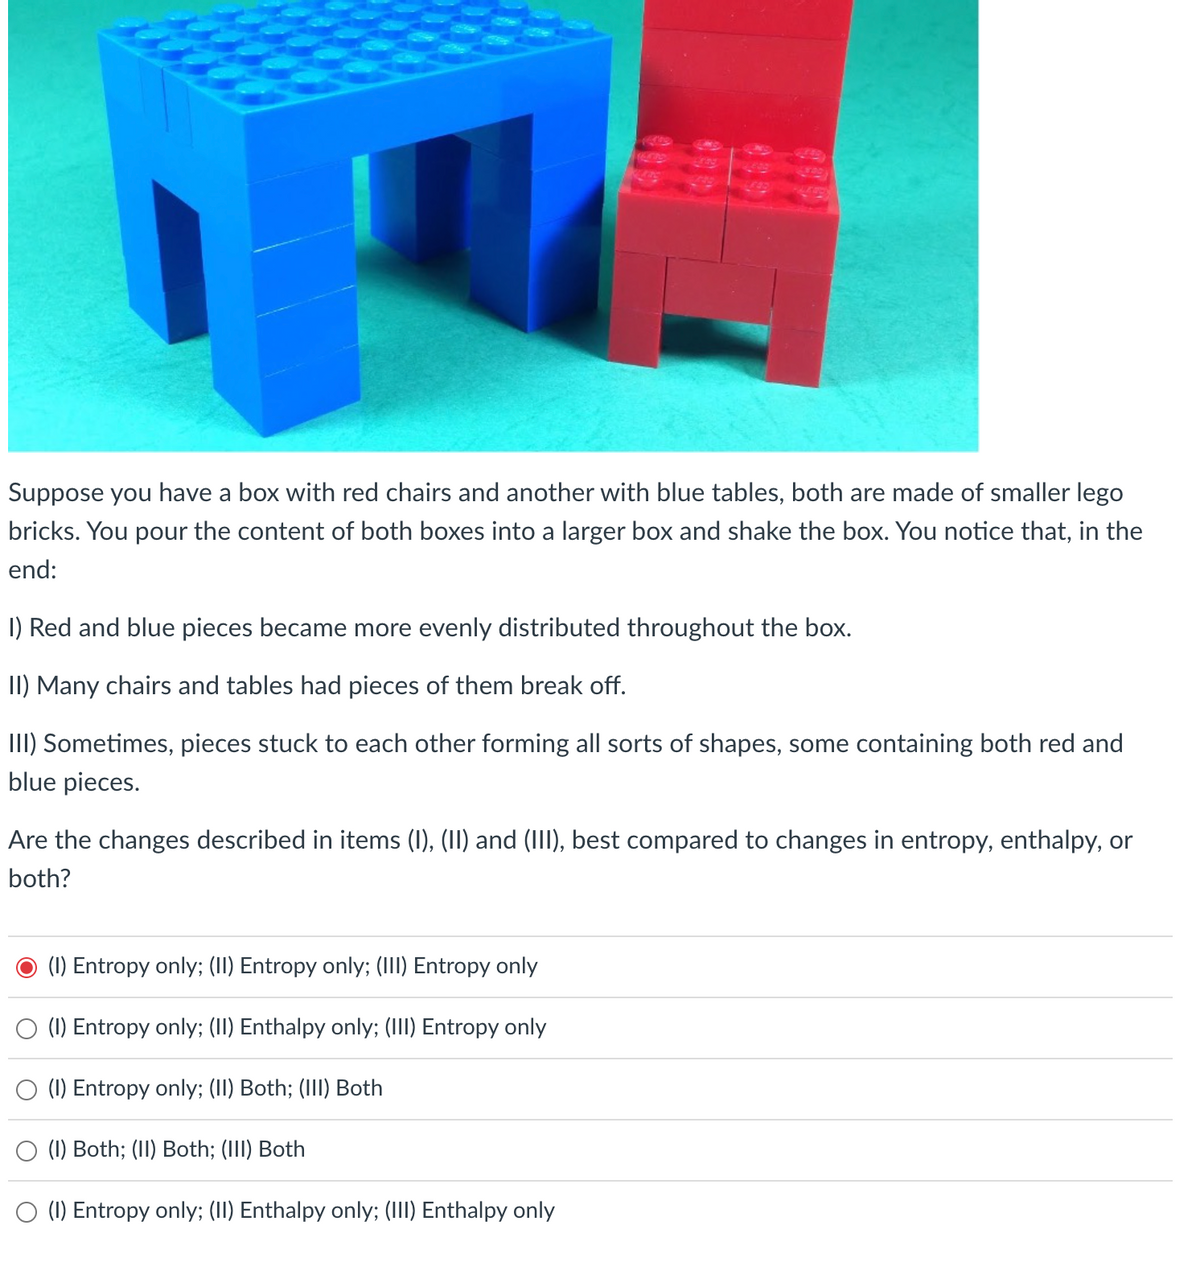 Suppose you have a box with red chairs and another with blue tables, both are made of smaller lego
bricks. You pour the content of both boxes into a larger box and shake the box. You notice that, in the
end:
1) Red and blue pieces became more evenly distributed throughout the box.
II) Many chairs and tables had pieces of them break off.
III) Sometimes, pieces stuck to each other forming all sorts of shapes, some containing both red and
blue pieces.
Are the changes described in items (I), (II) and (III), best compared to changes in entropy, enthalpy, or
both?
(1) Entropy only; (II) Entropy only; (III) Entropy only
(1) Entropy only; (II) Enthalpy only; (III) Entropy only
(1) Entropy only; (II) Both; (III) Both
(1) Both; (II) Both; (III) Both
(1) Entropy only; (II) Enthalpy only; (III) Enthalpy only